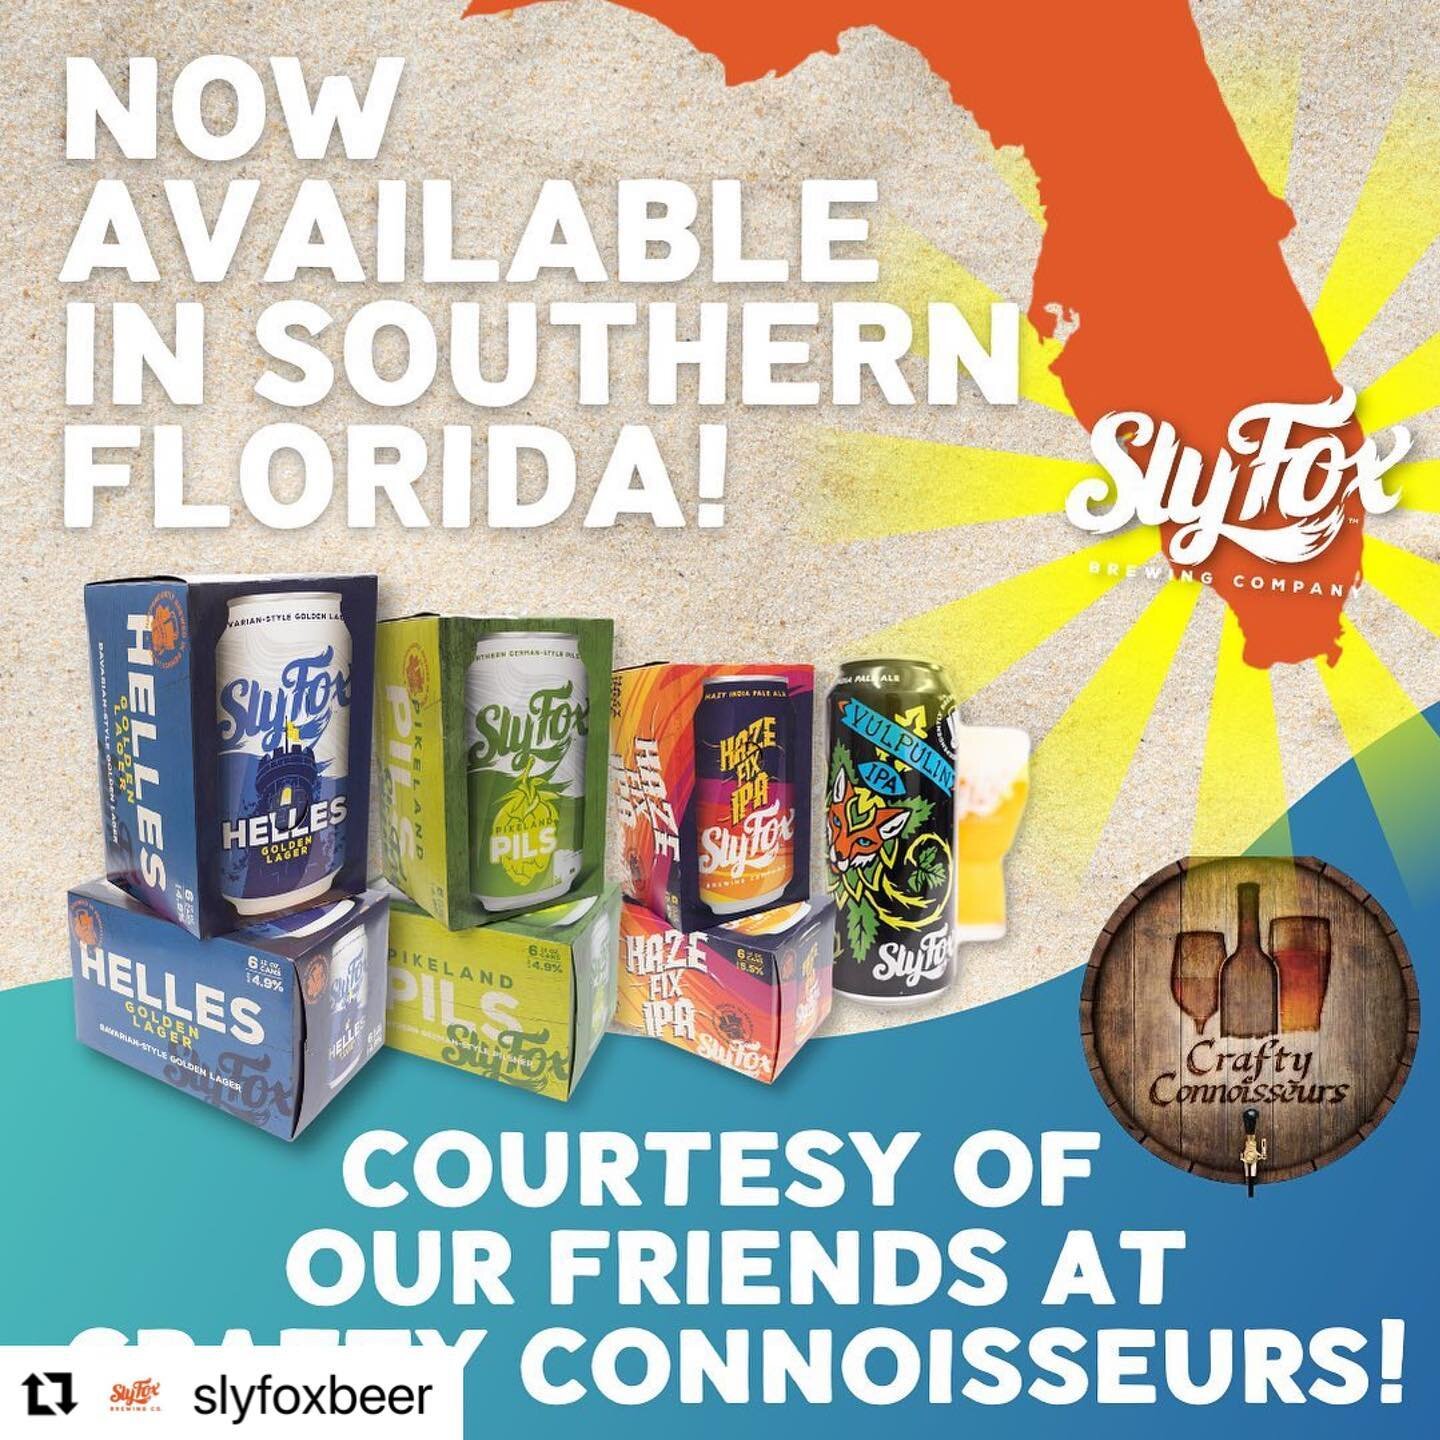 🥳🍻🥳🍻🥳🍻
#Repost @slyfoxbeer
・・・
🚨 Attention Sly Fox Fans! 🚨 Our worldclass beers are now available in Southern Florida courtesy of our friends at @crafty_connoisseurs Check your local retailer for availability! Prost! ☀️🍻🌴🦊 #slyfoxbeer #sly